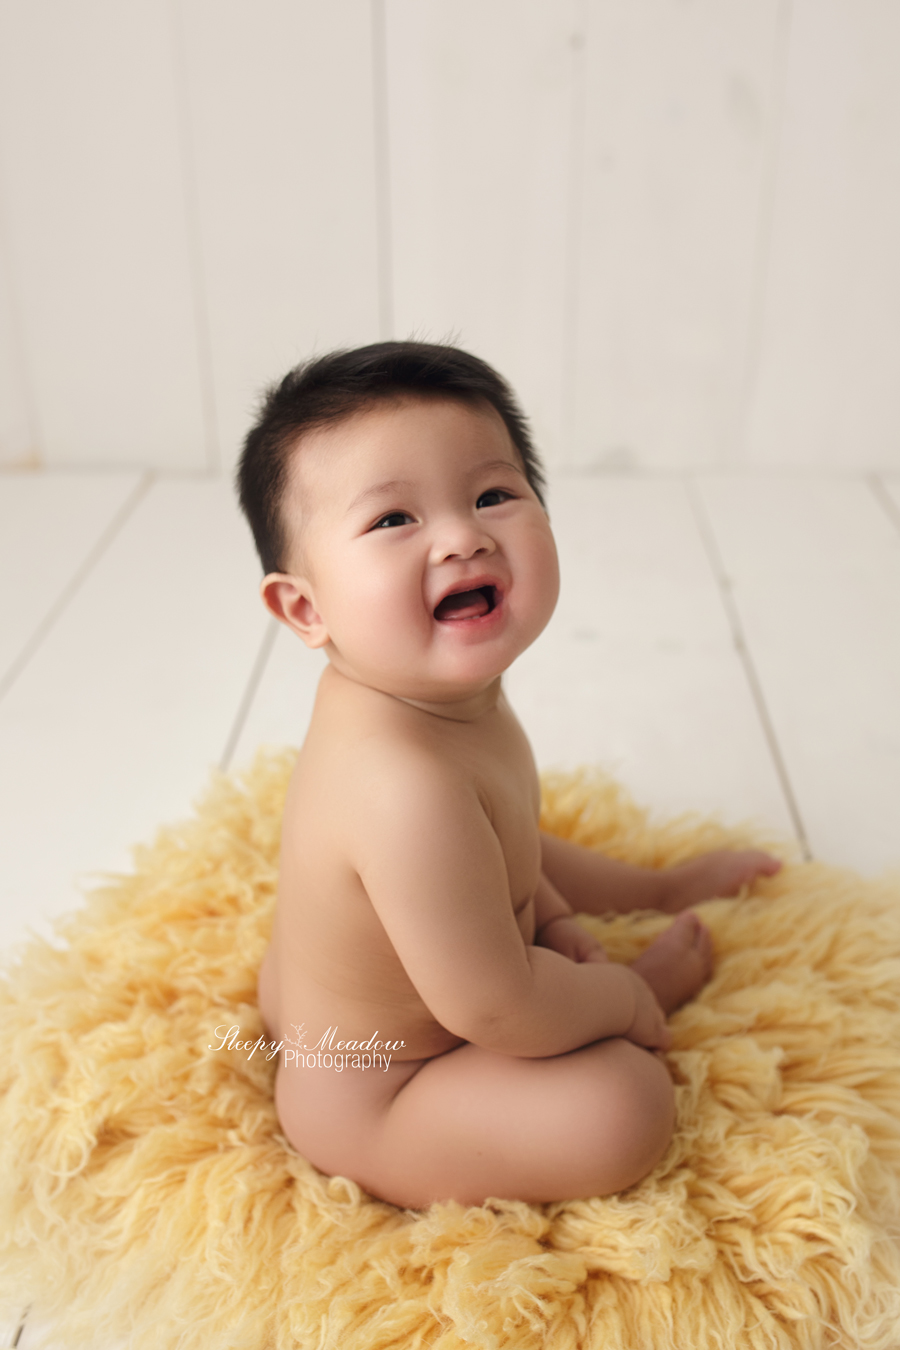 Baby poses on yellow luneberry flokati rug for his milestone session with Sleepy Meadow Photography.